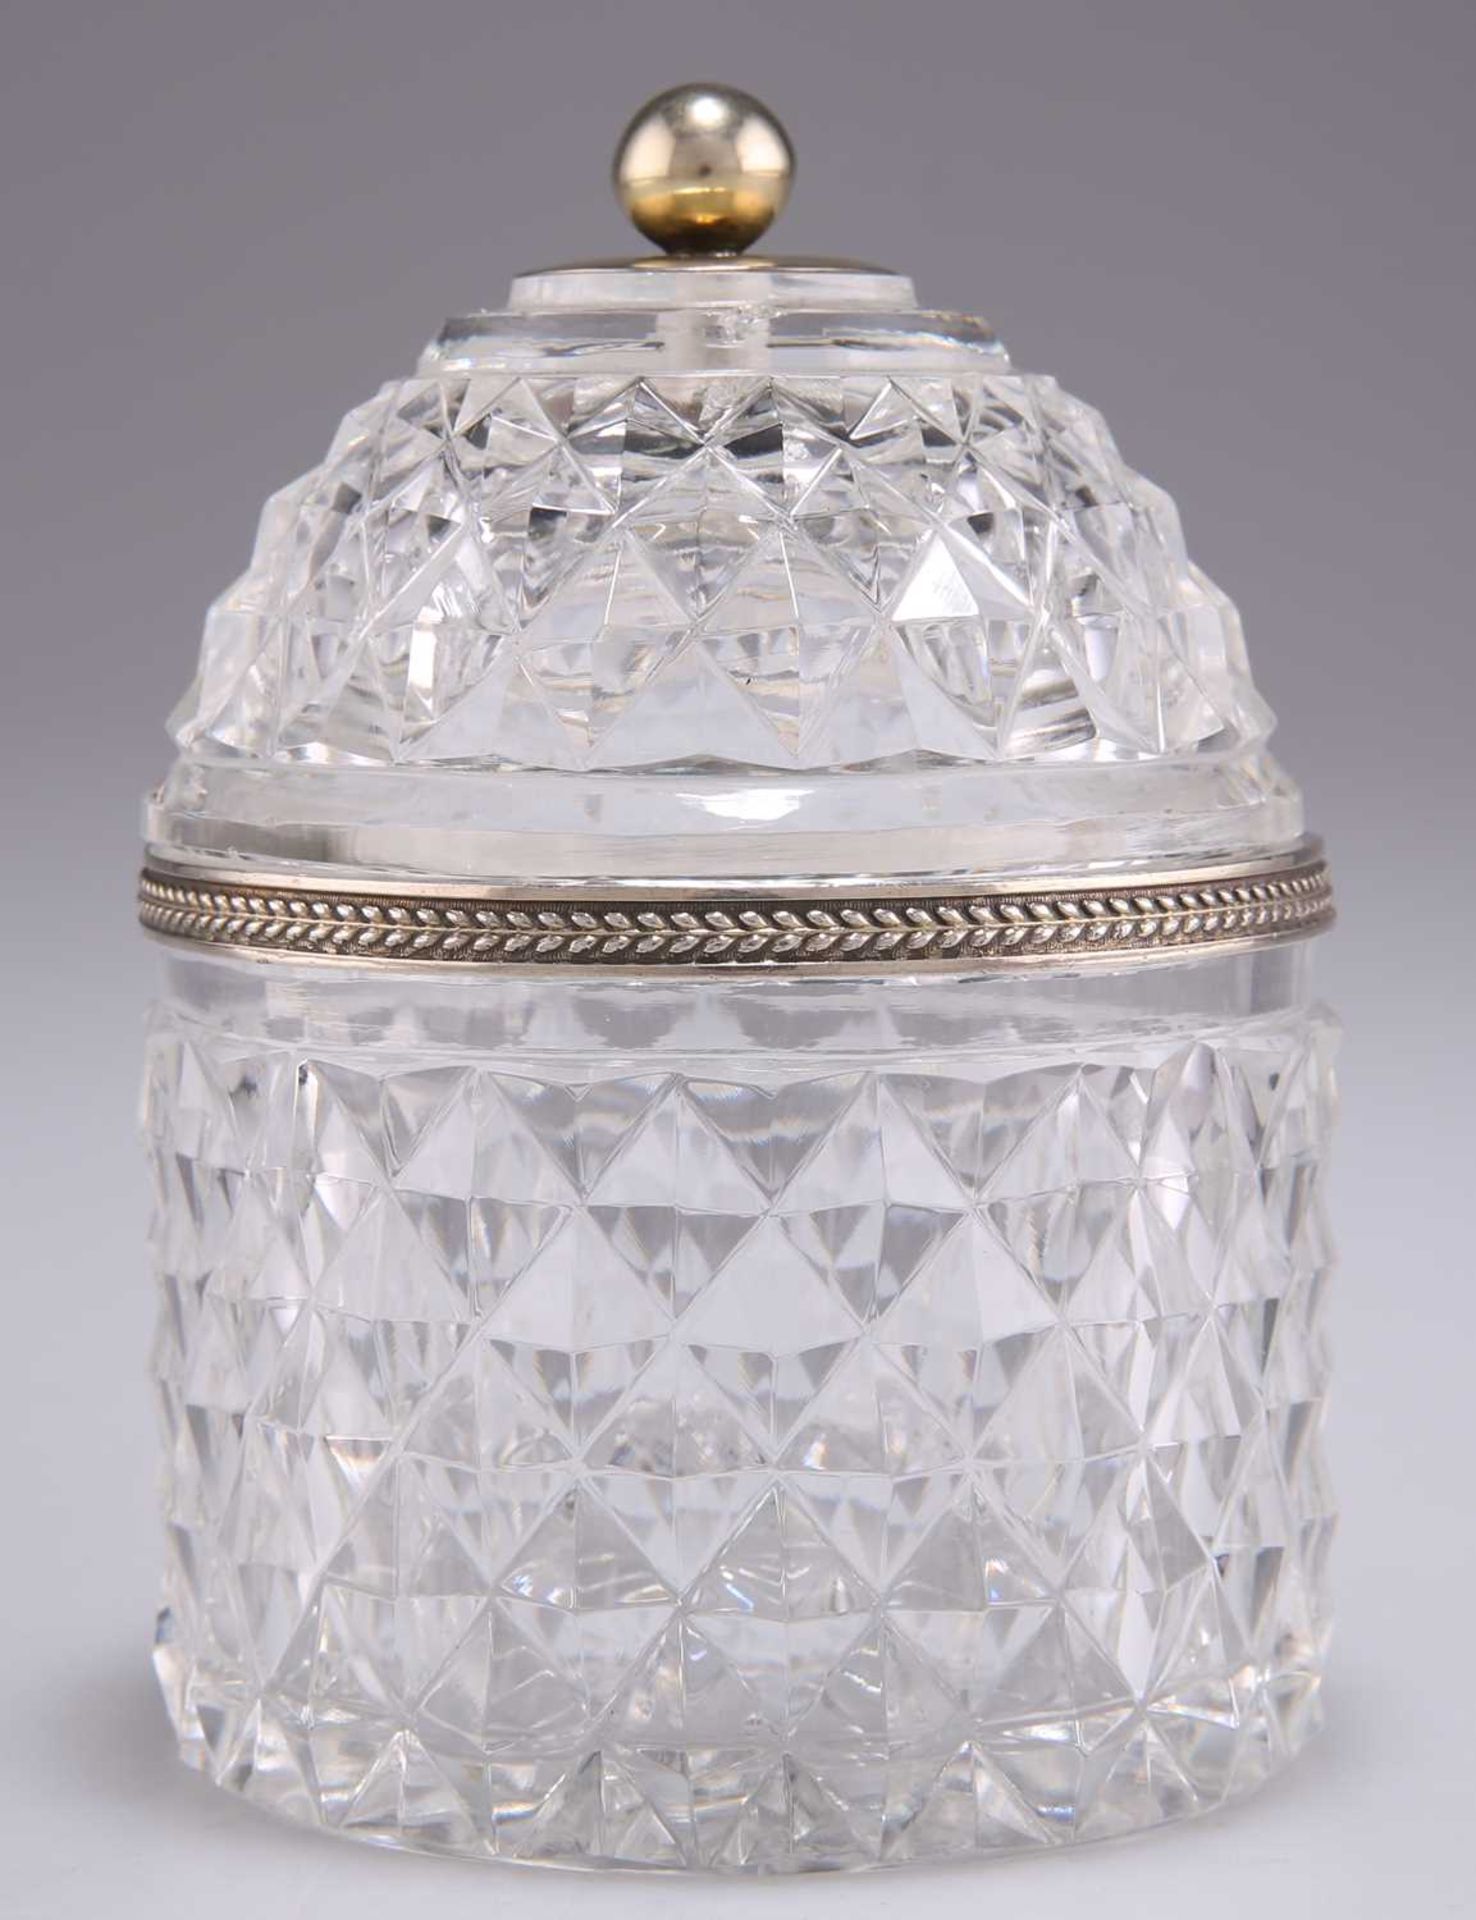 A GEORGE III SILVER-MOUNTED GLASS JAR AND COVER